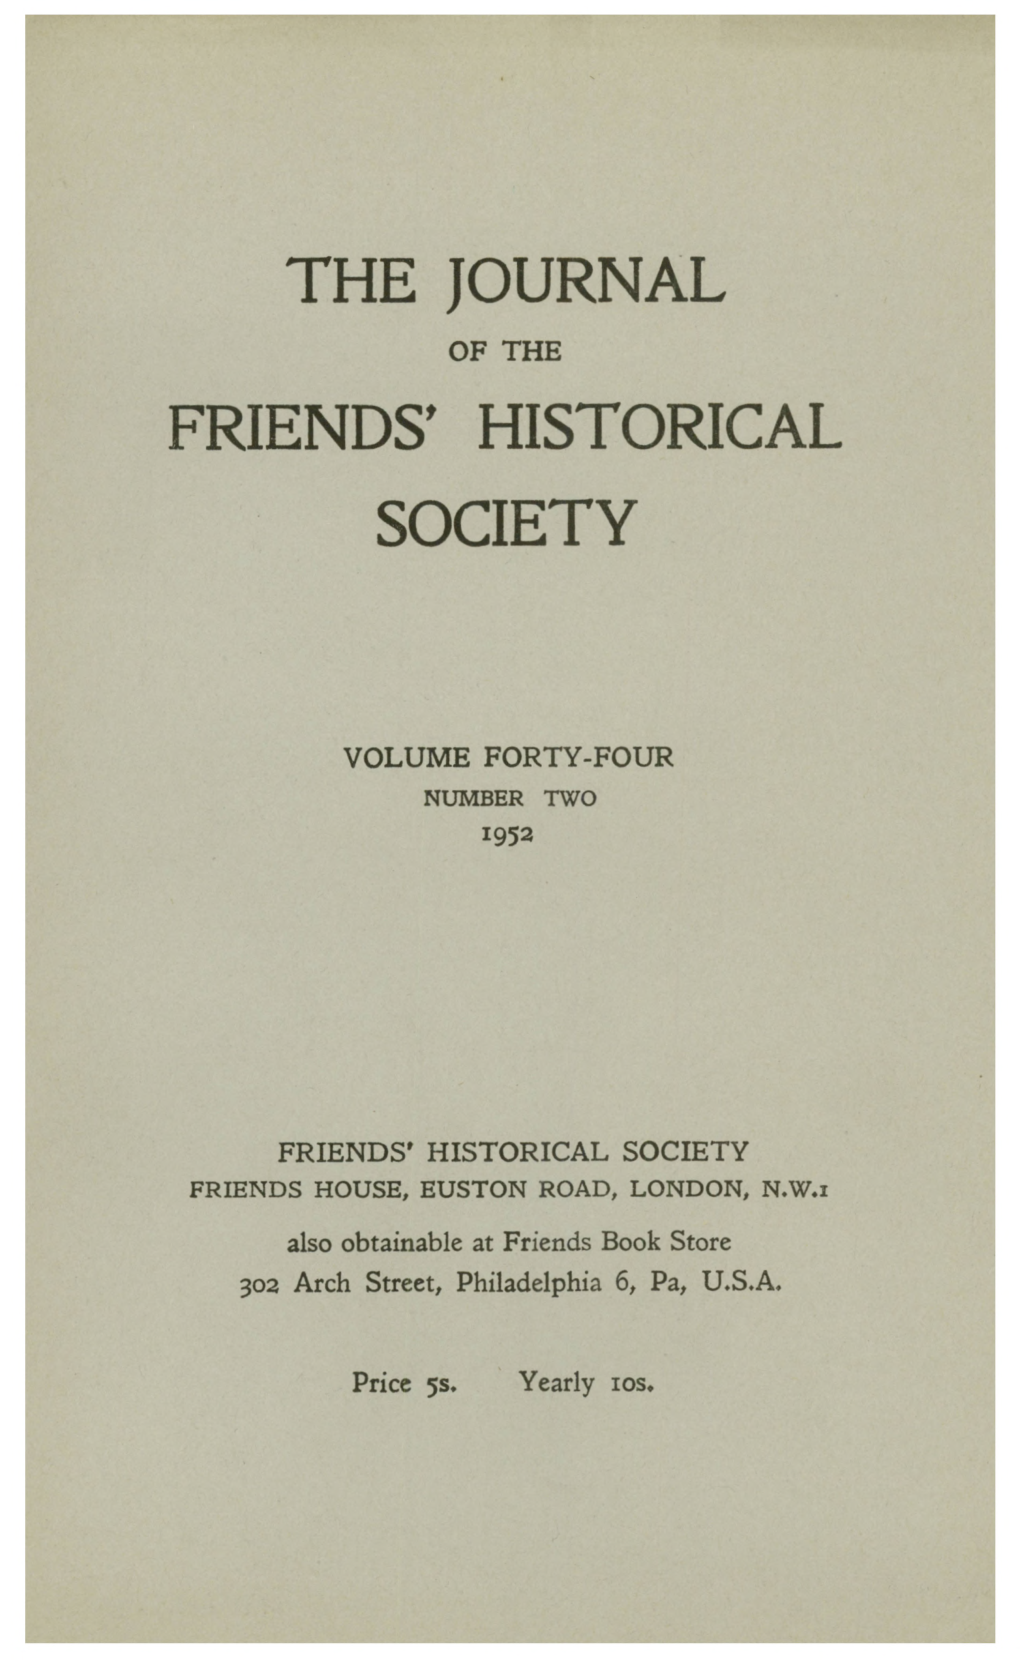 Of the Friends' Historical Society